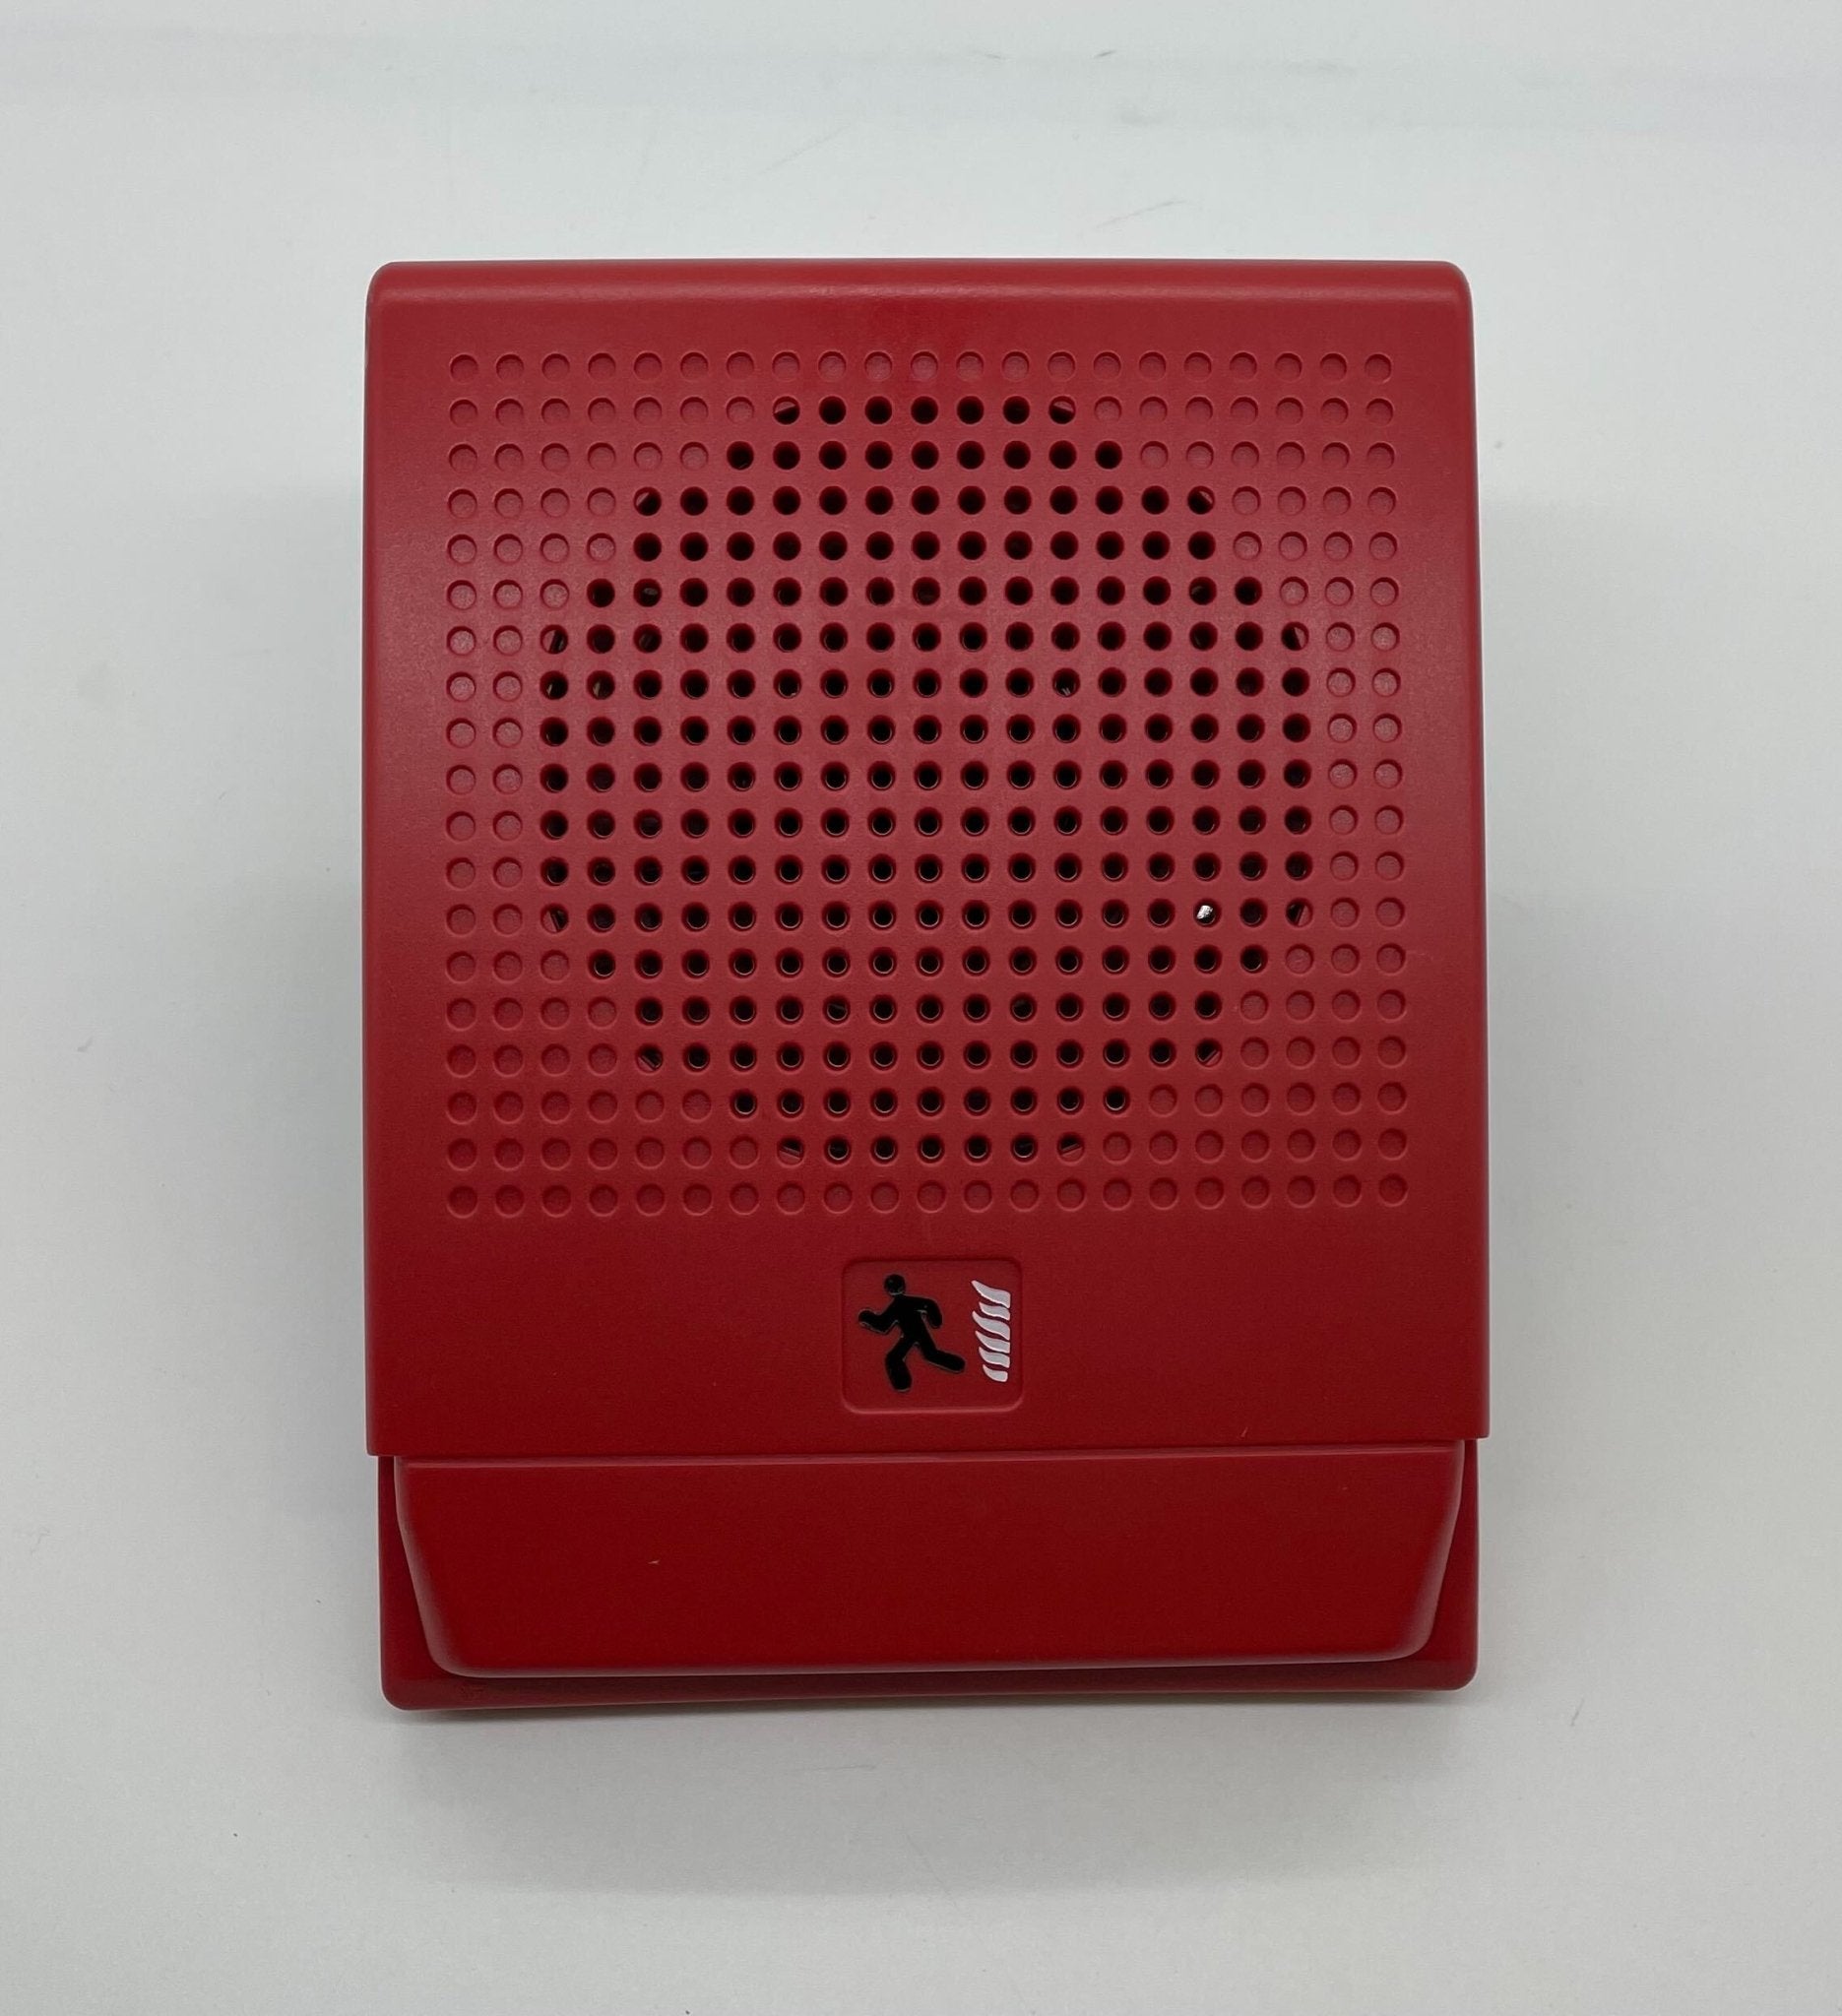 Edwards G4R-S7 - The Fire Alarm Supplier